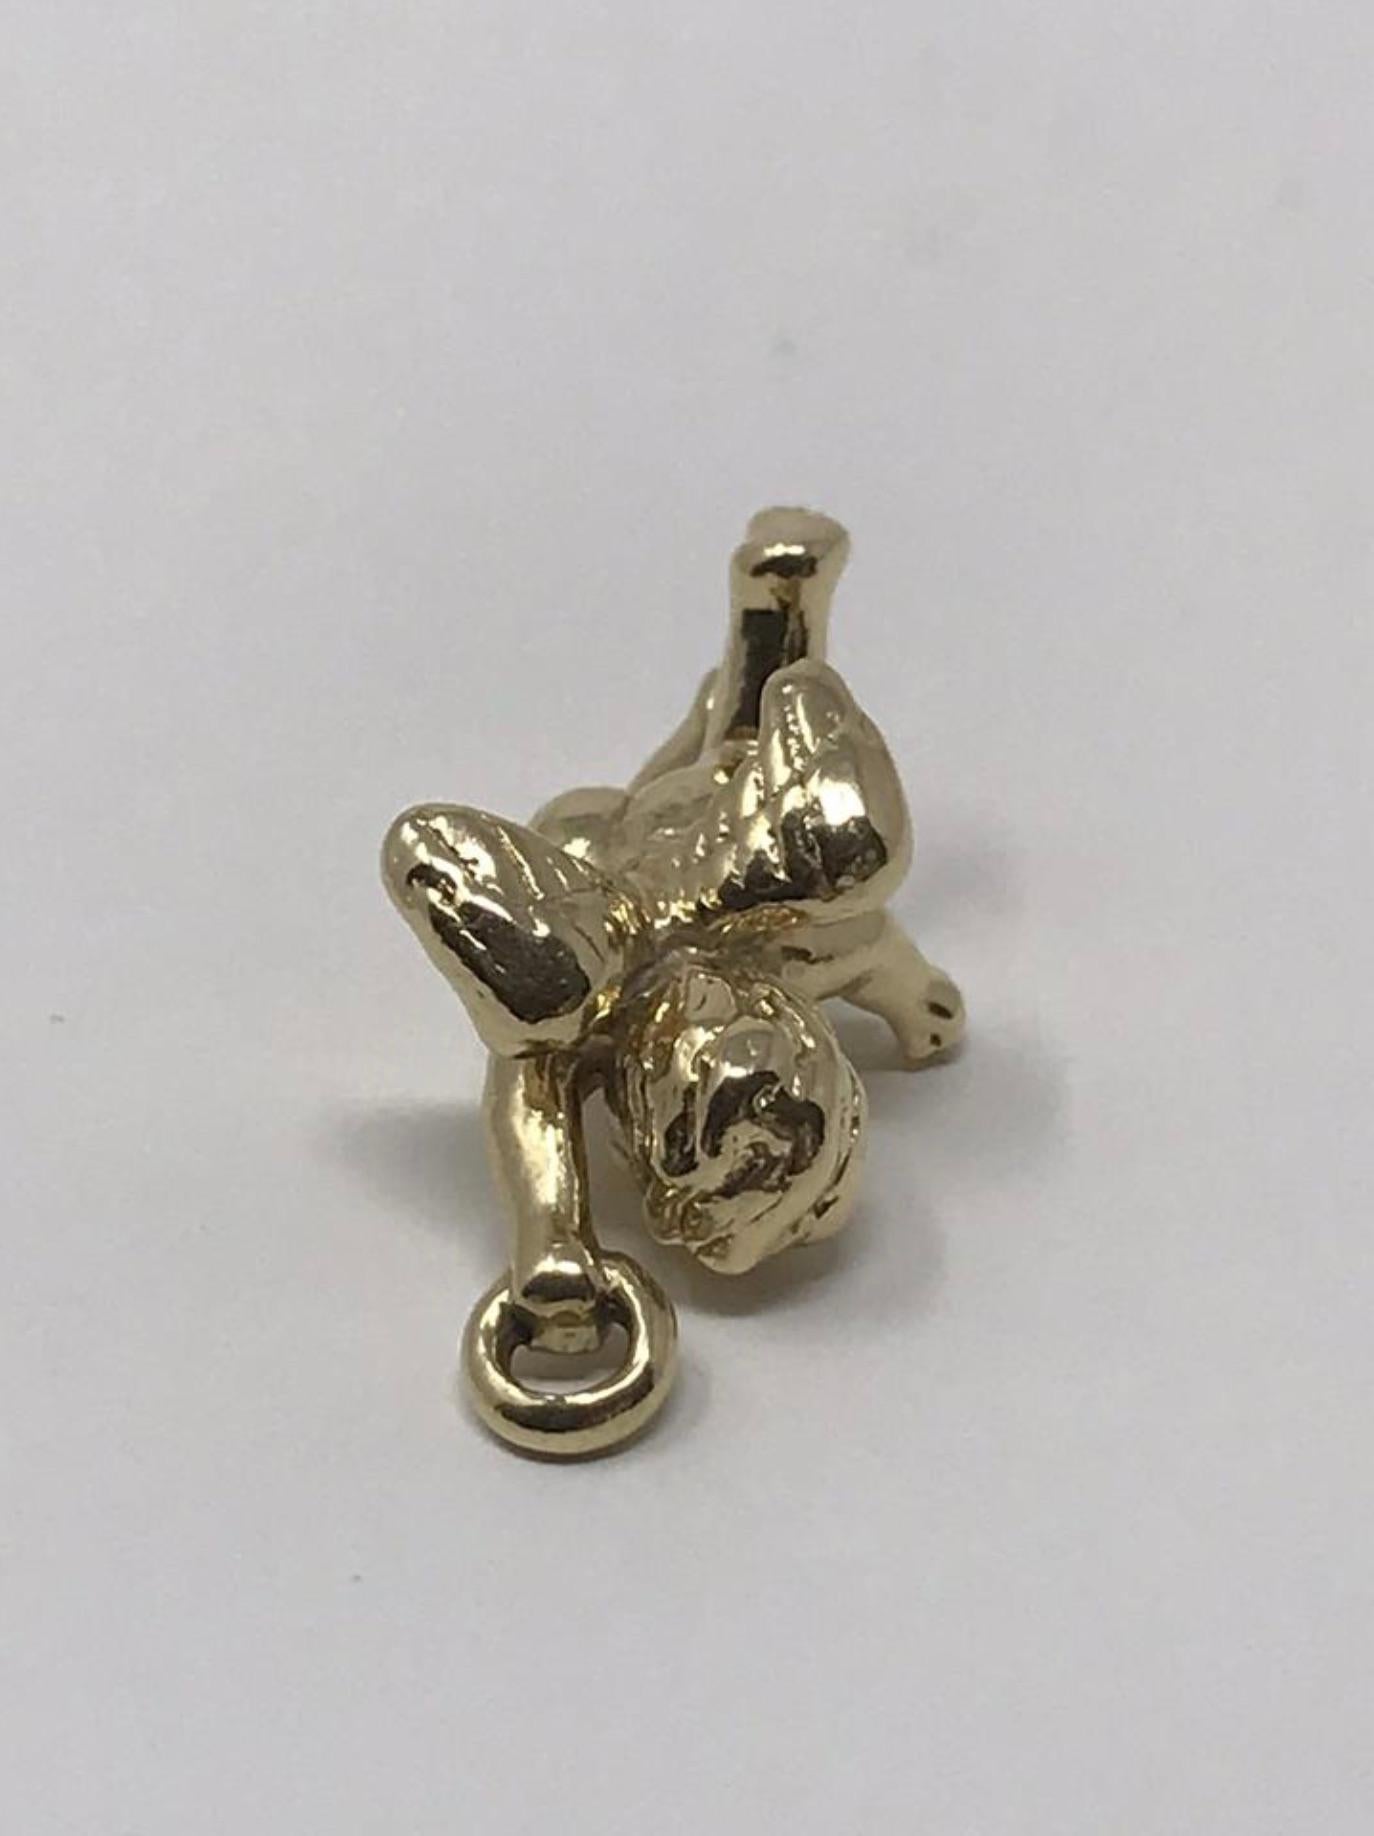 Tiffany & Co. 18 Karat Gold Cherub Charm/Pendent In Excellent Condition For Sale In Saint Charles, IL